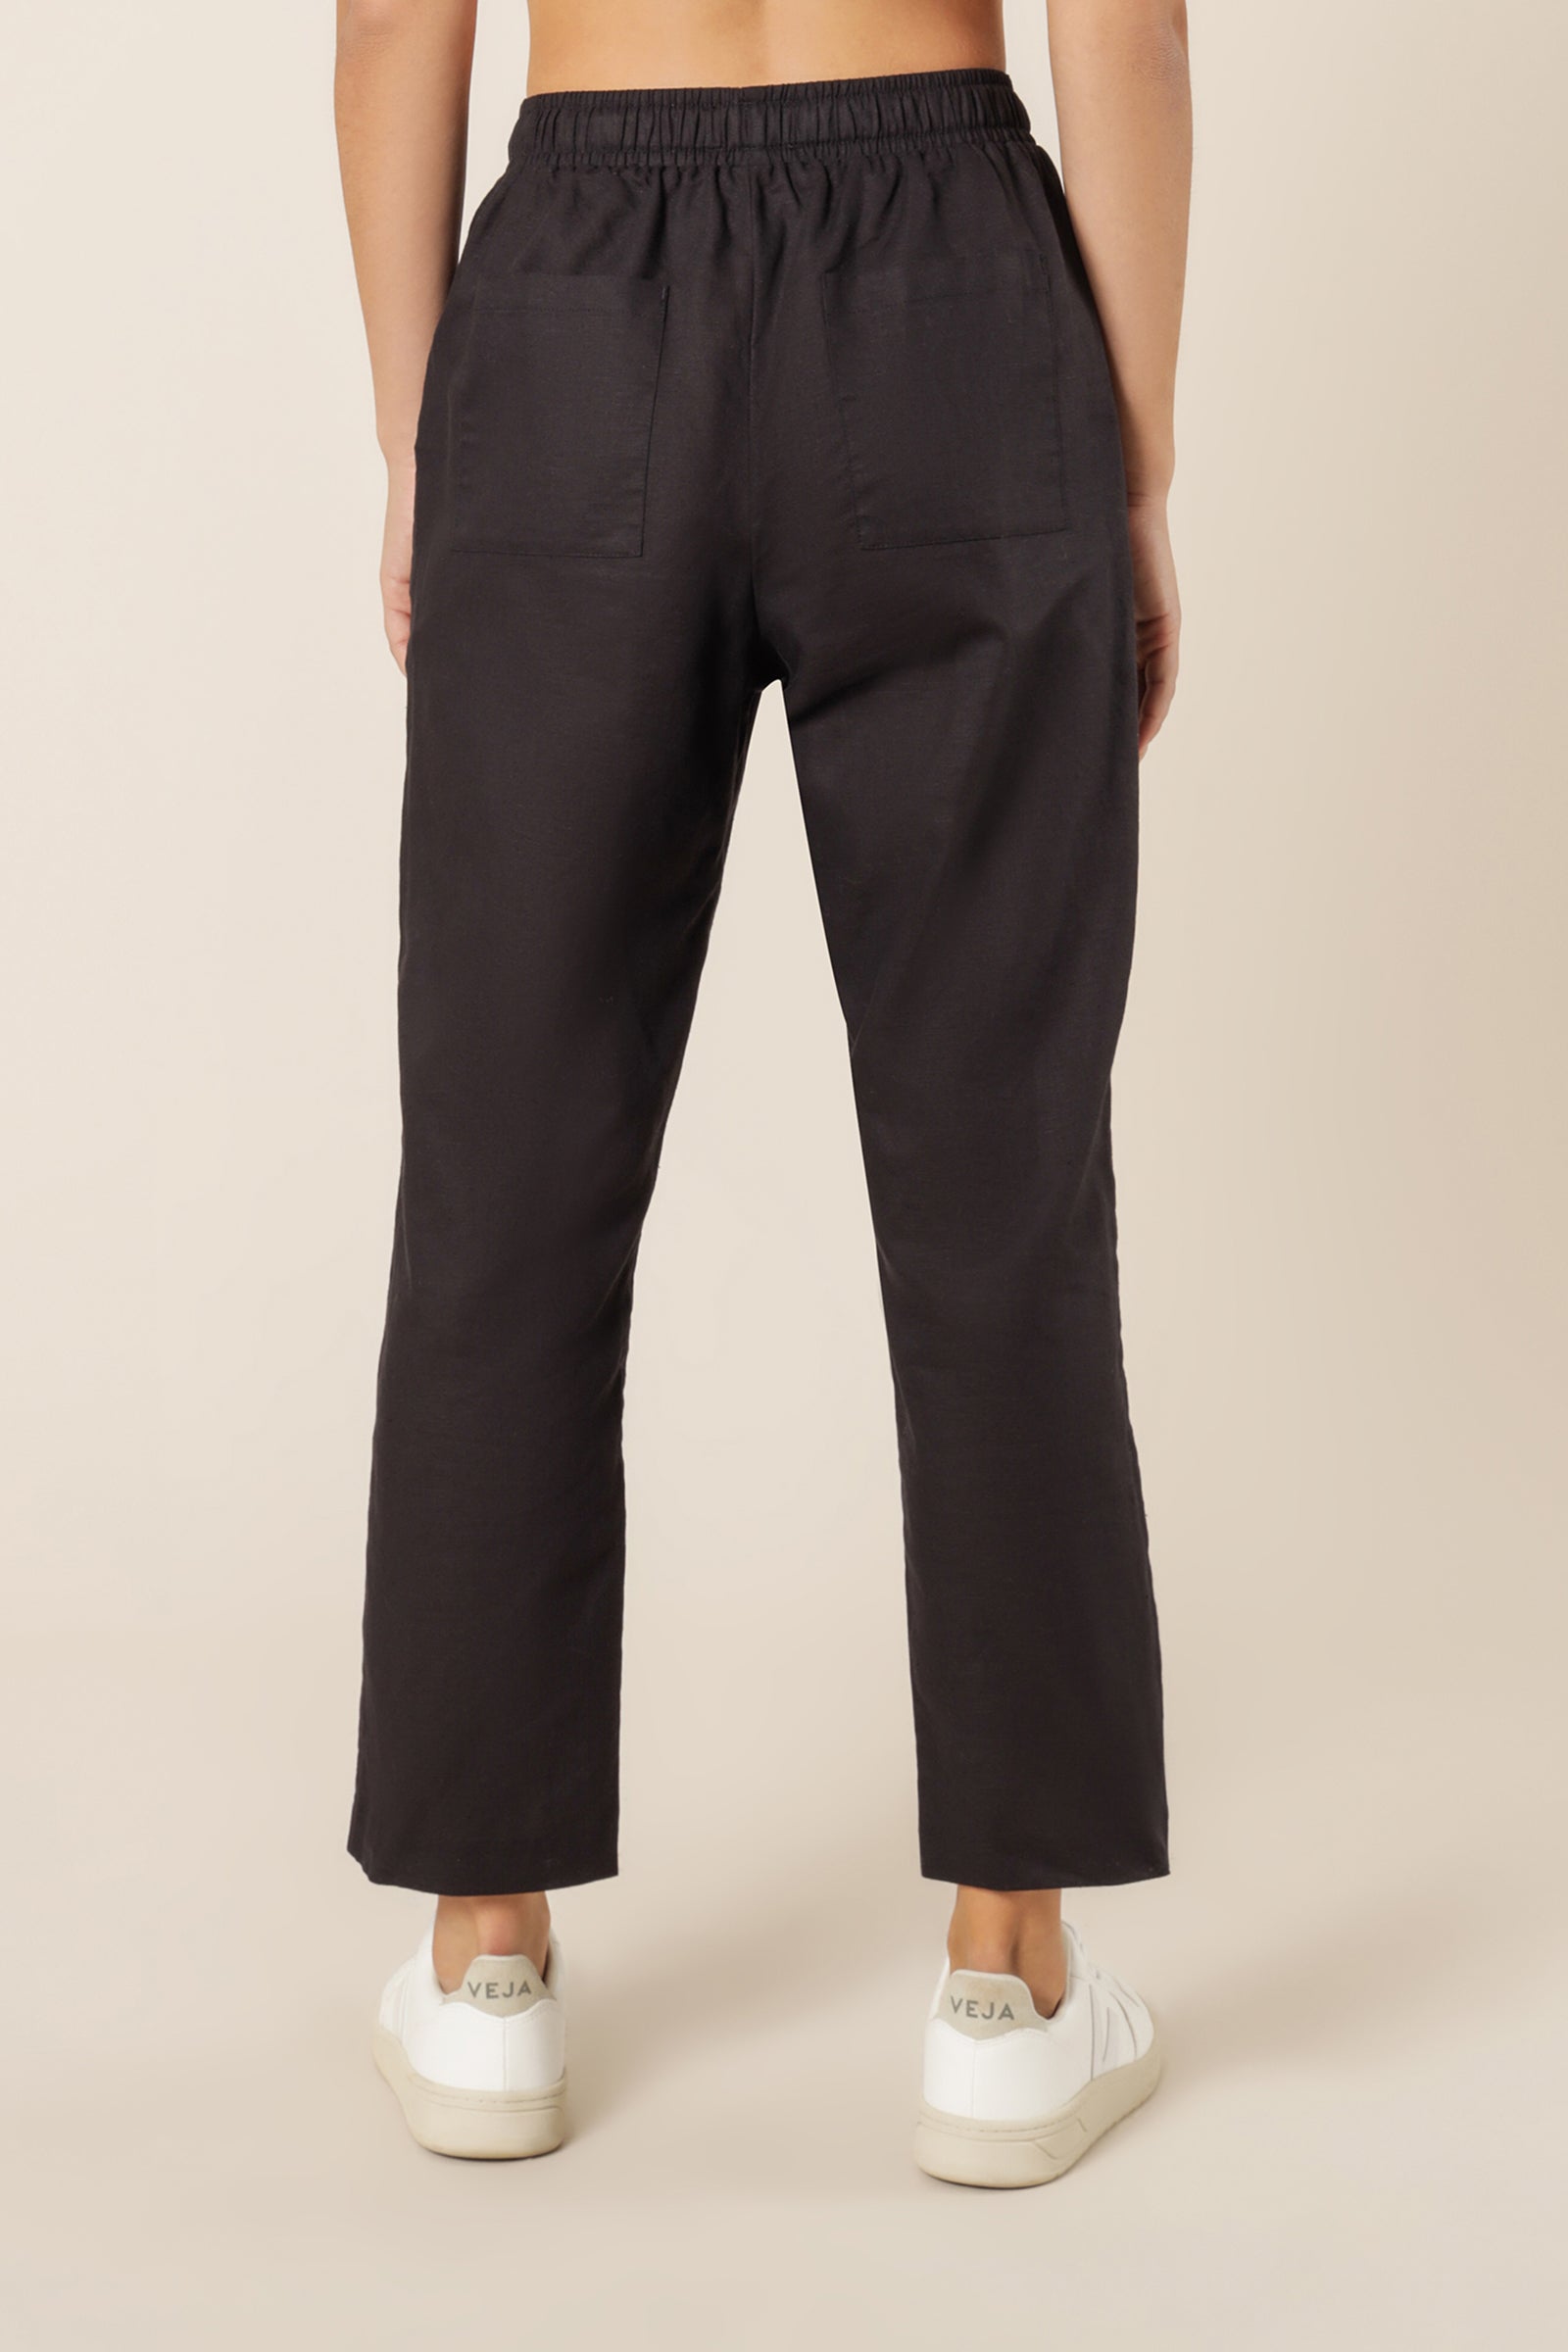 Nude Lucy Nude Classic Pant Black Pants 